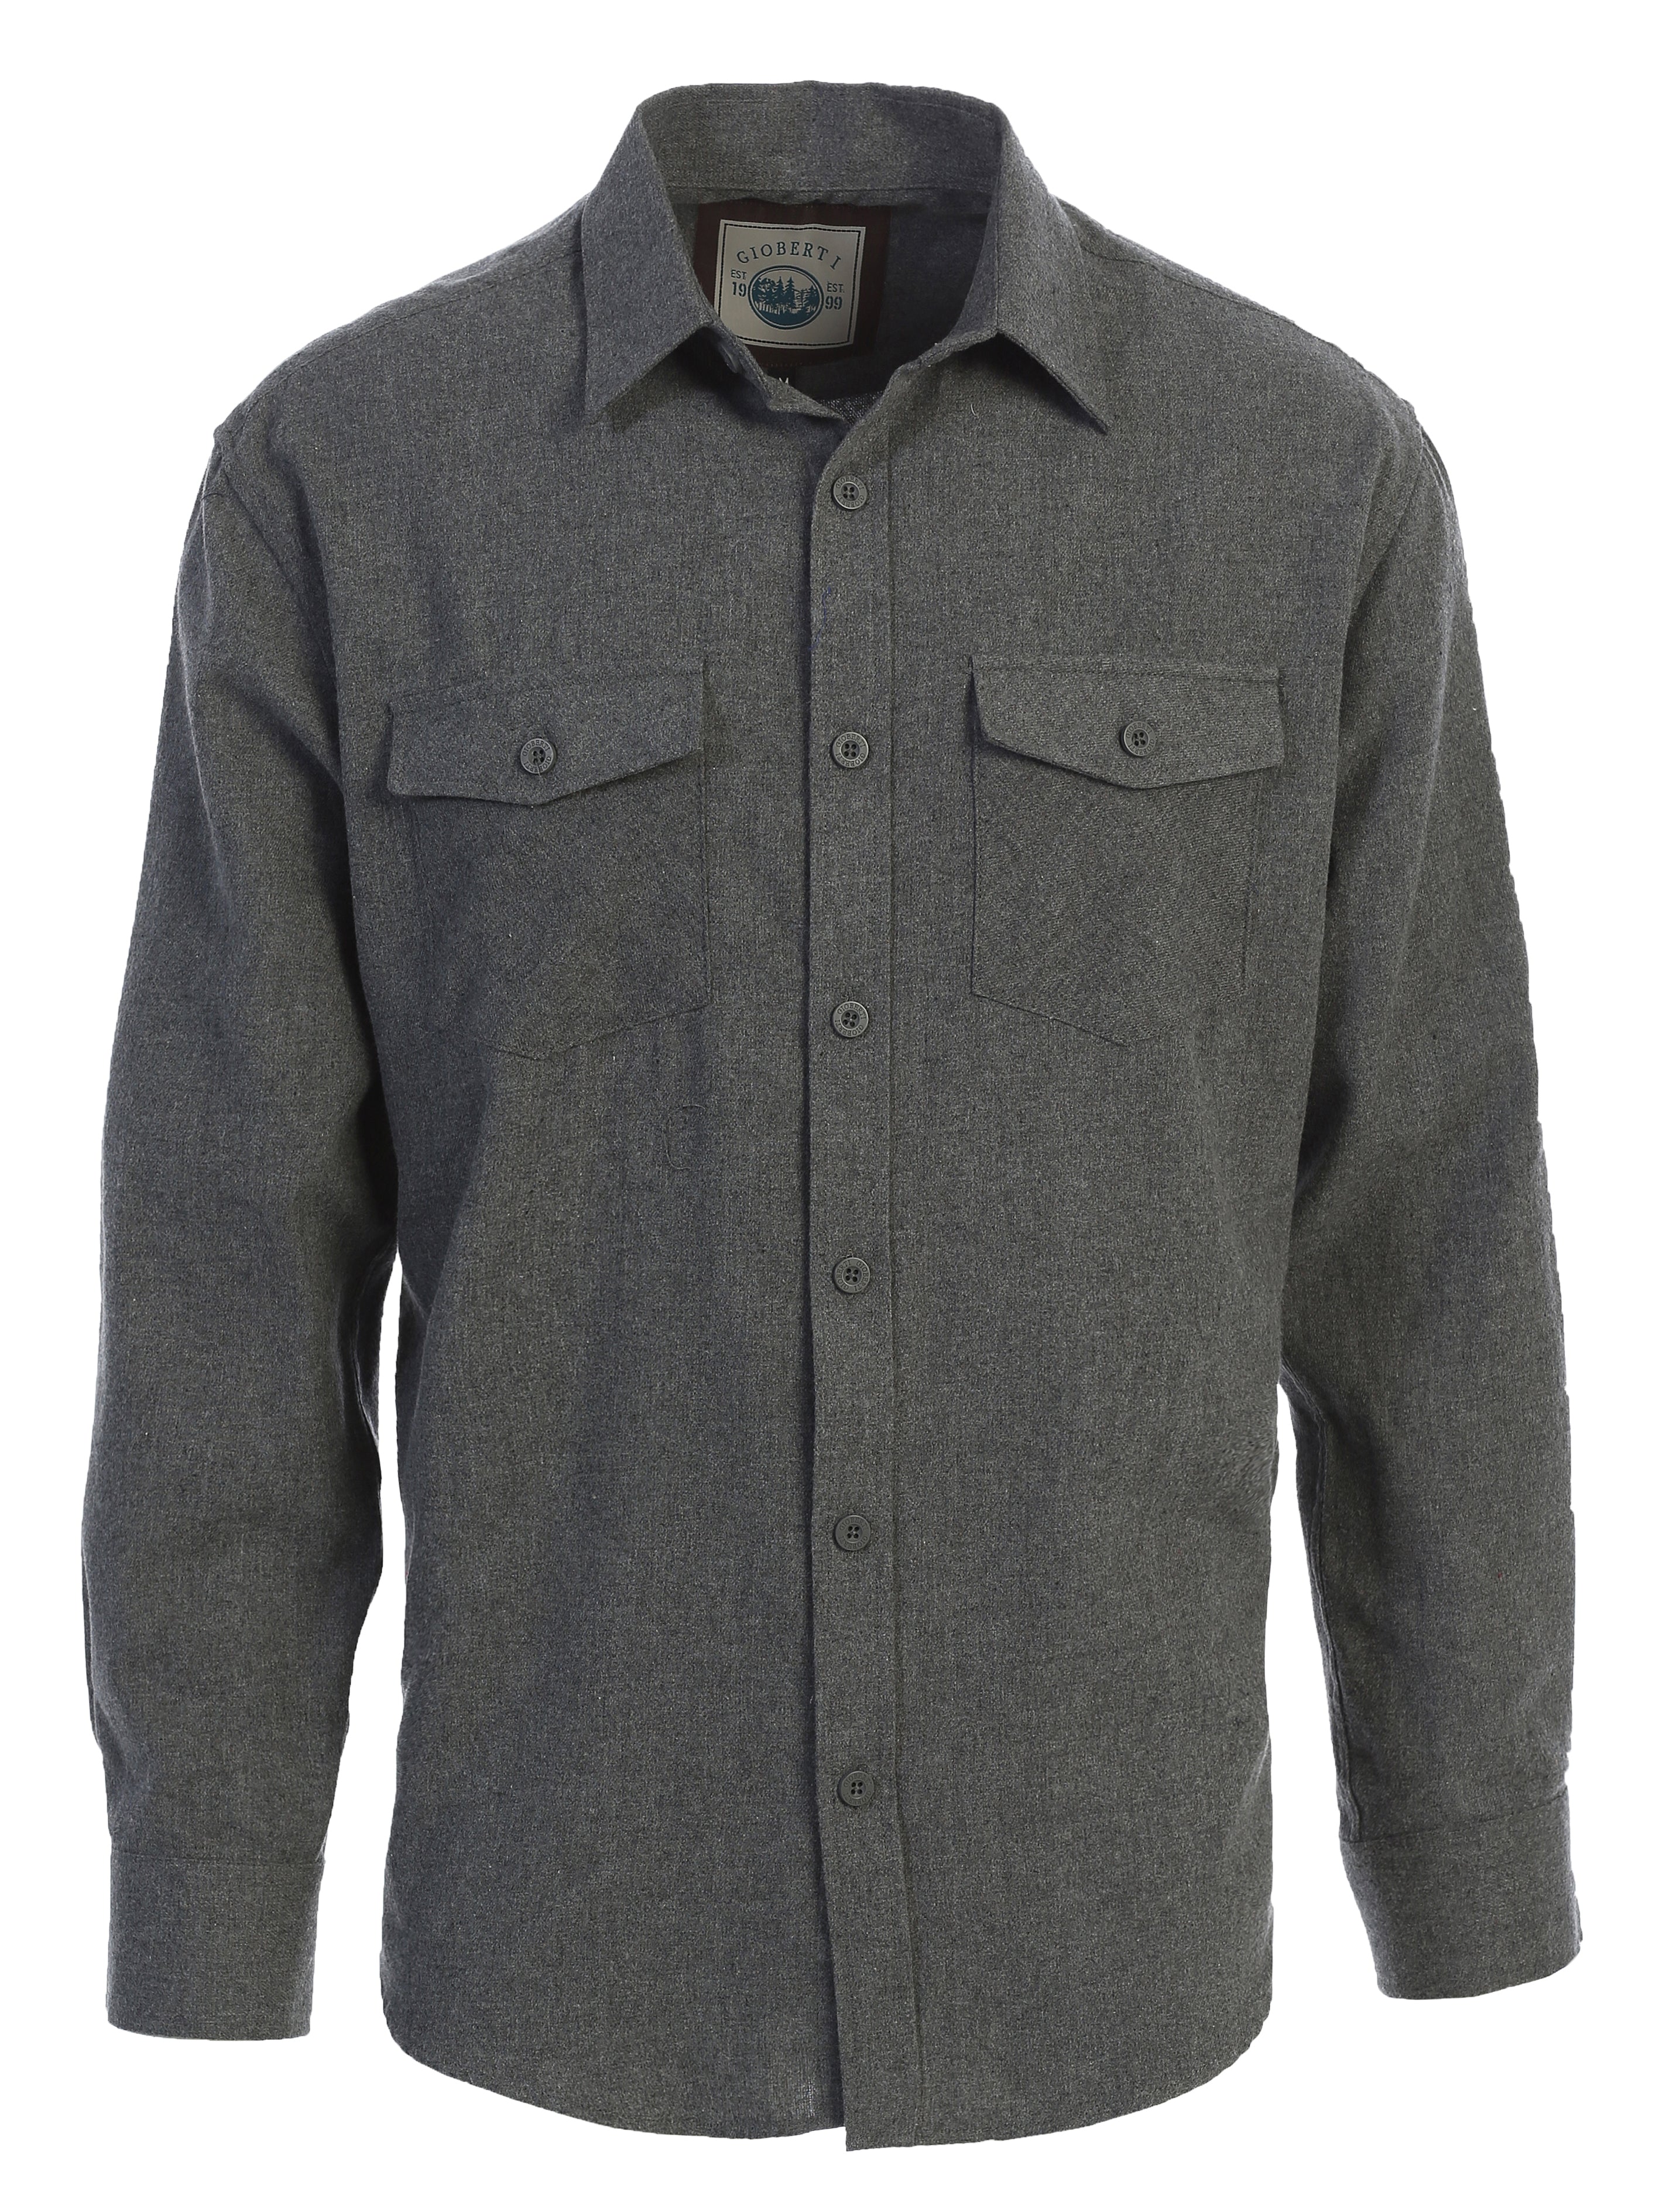 title:Gioberti Men's Heather Charcoal Plaid Checkered Brushed Flannel Shirt;color:Heather Charcoal